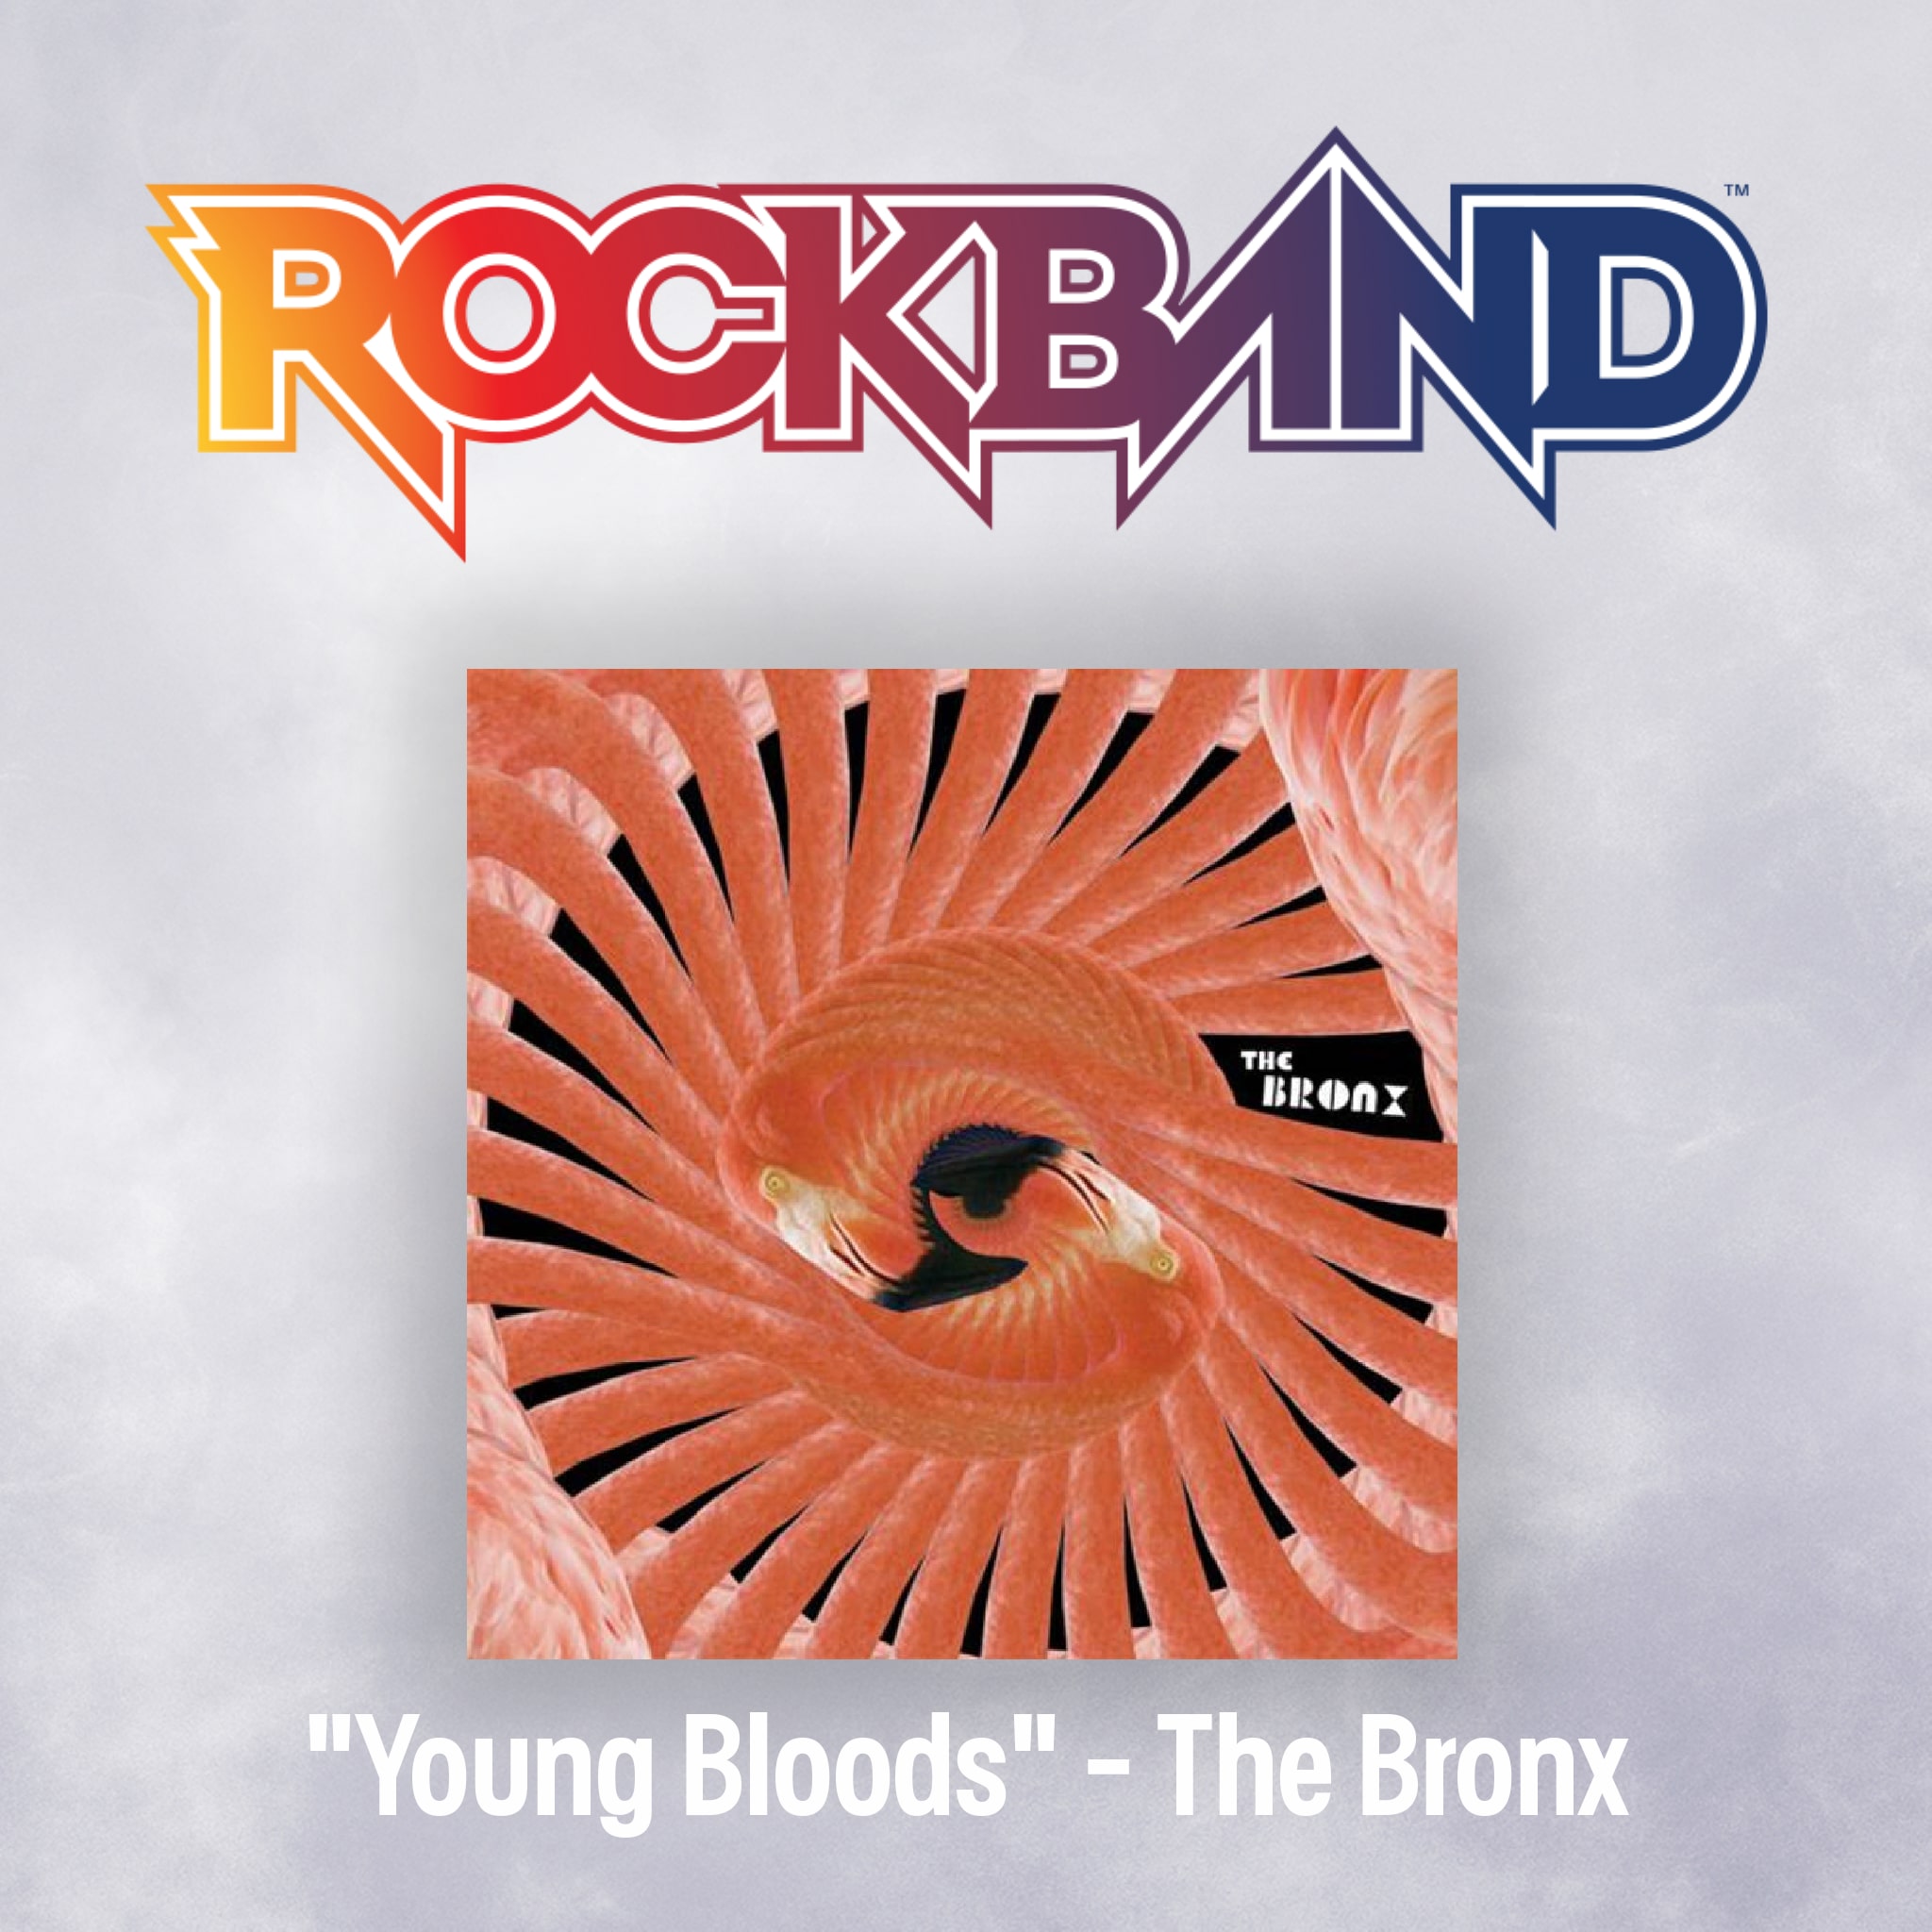 'Young Bloods' - The Bronx